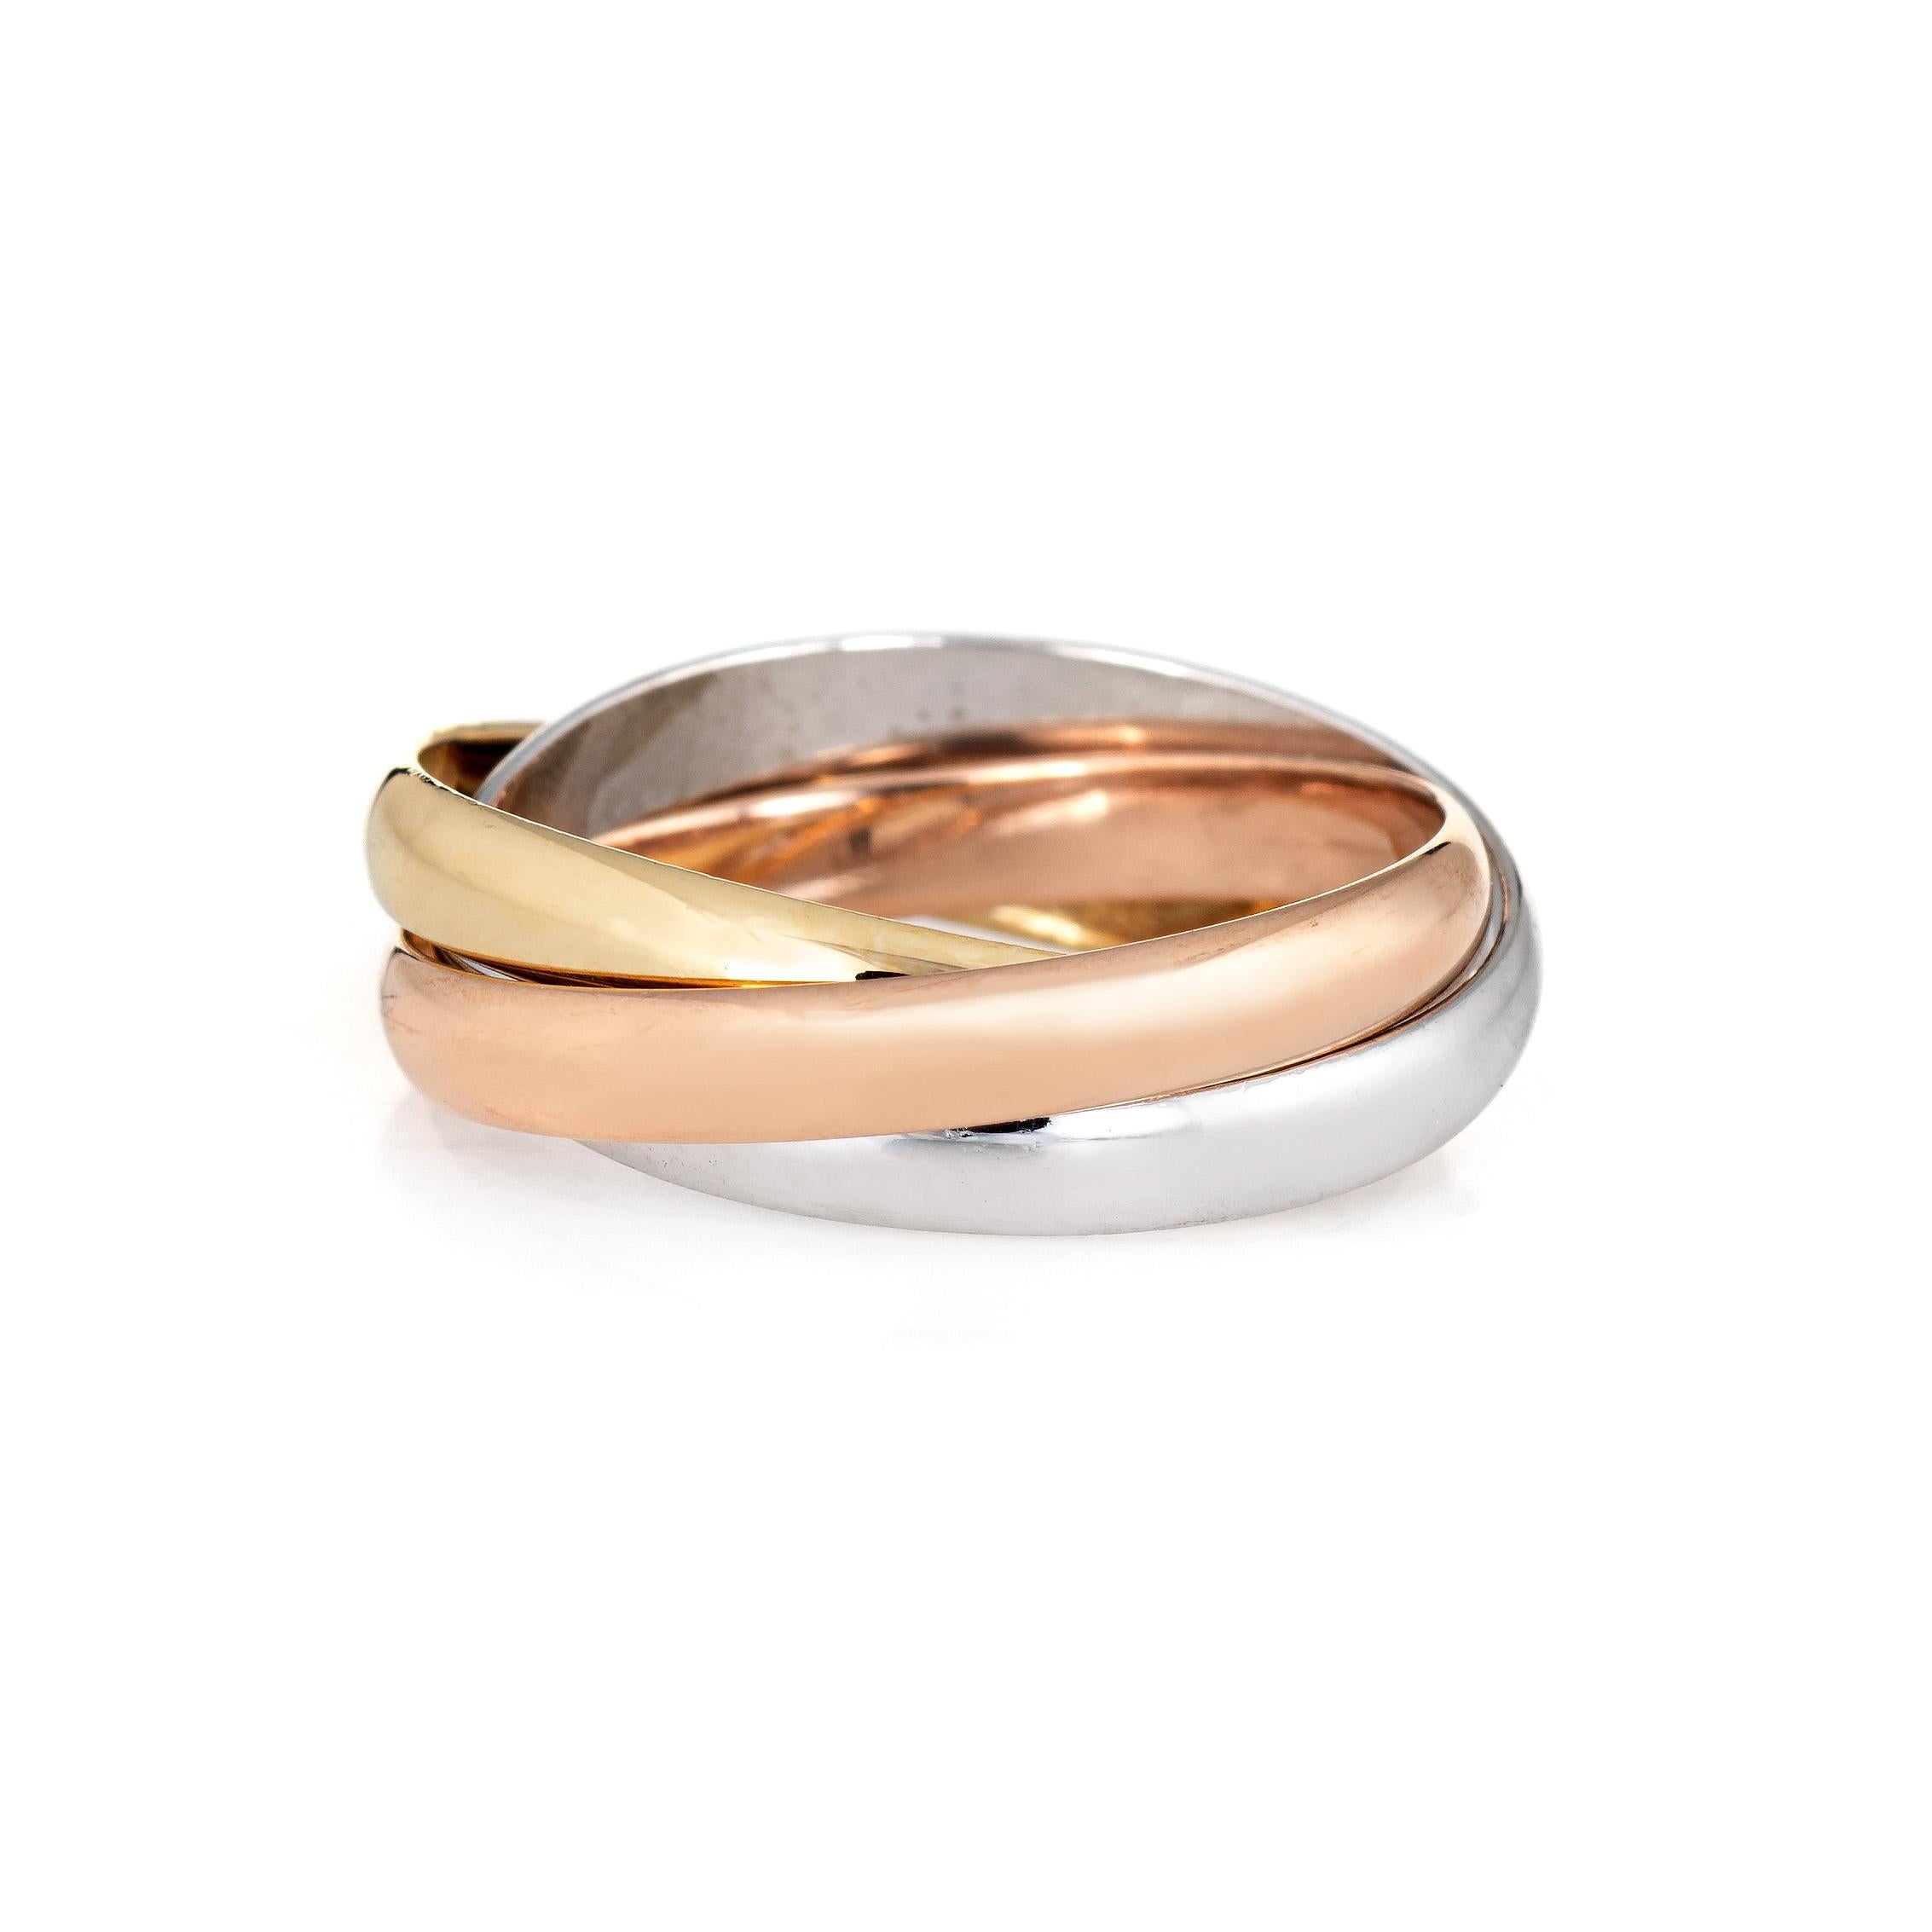 Pre owned Cartier Trinity 3 band ring crafted in 18 karat yellow, rose and white gold.  

The ring features three bands measuring 2.8mm each (small model).

The ring is in very good condition and was recently professionally cleaned and polished. No